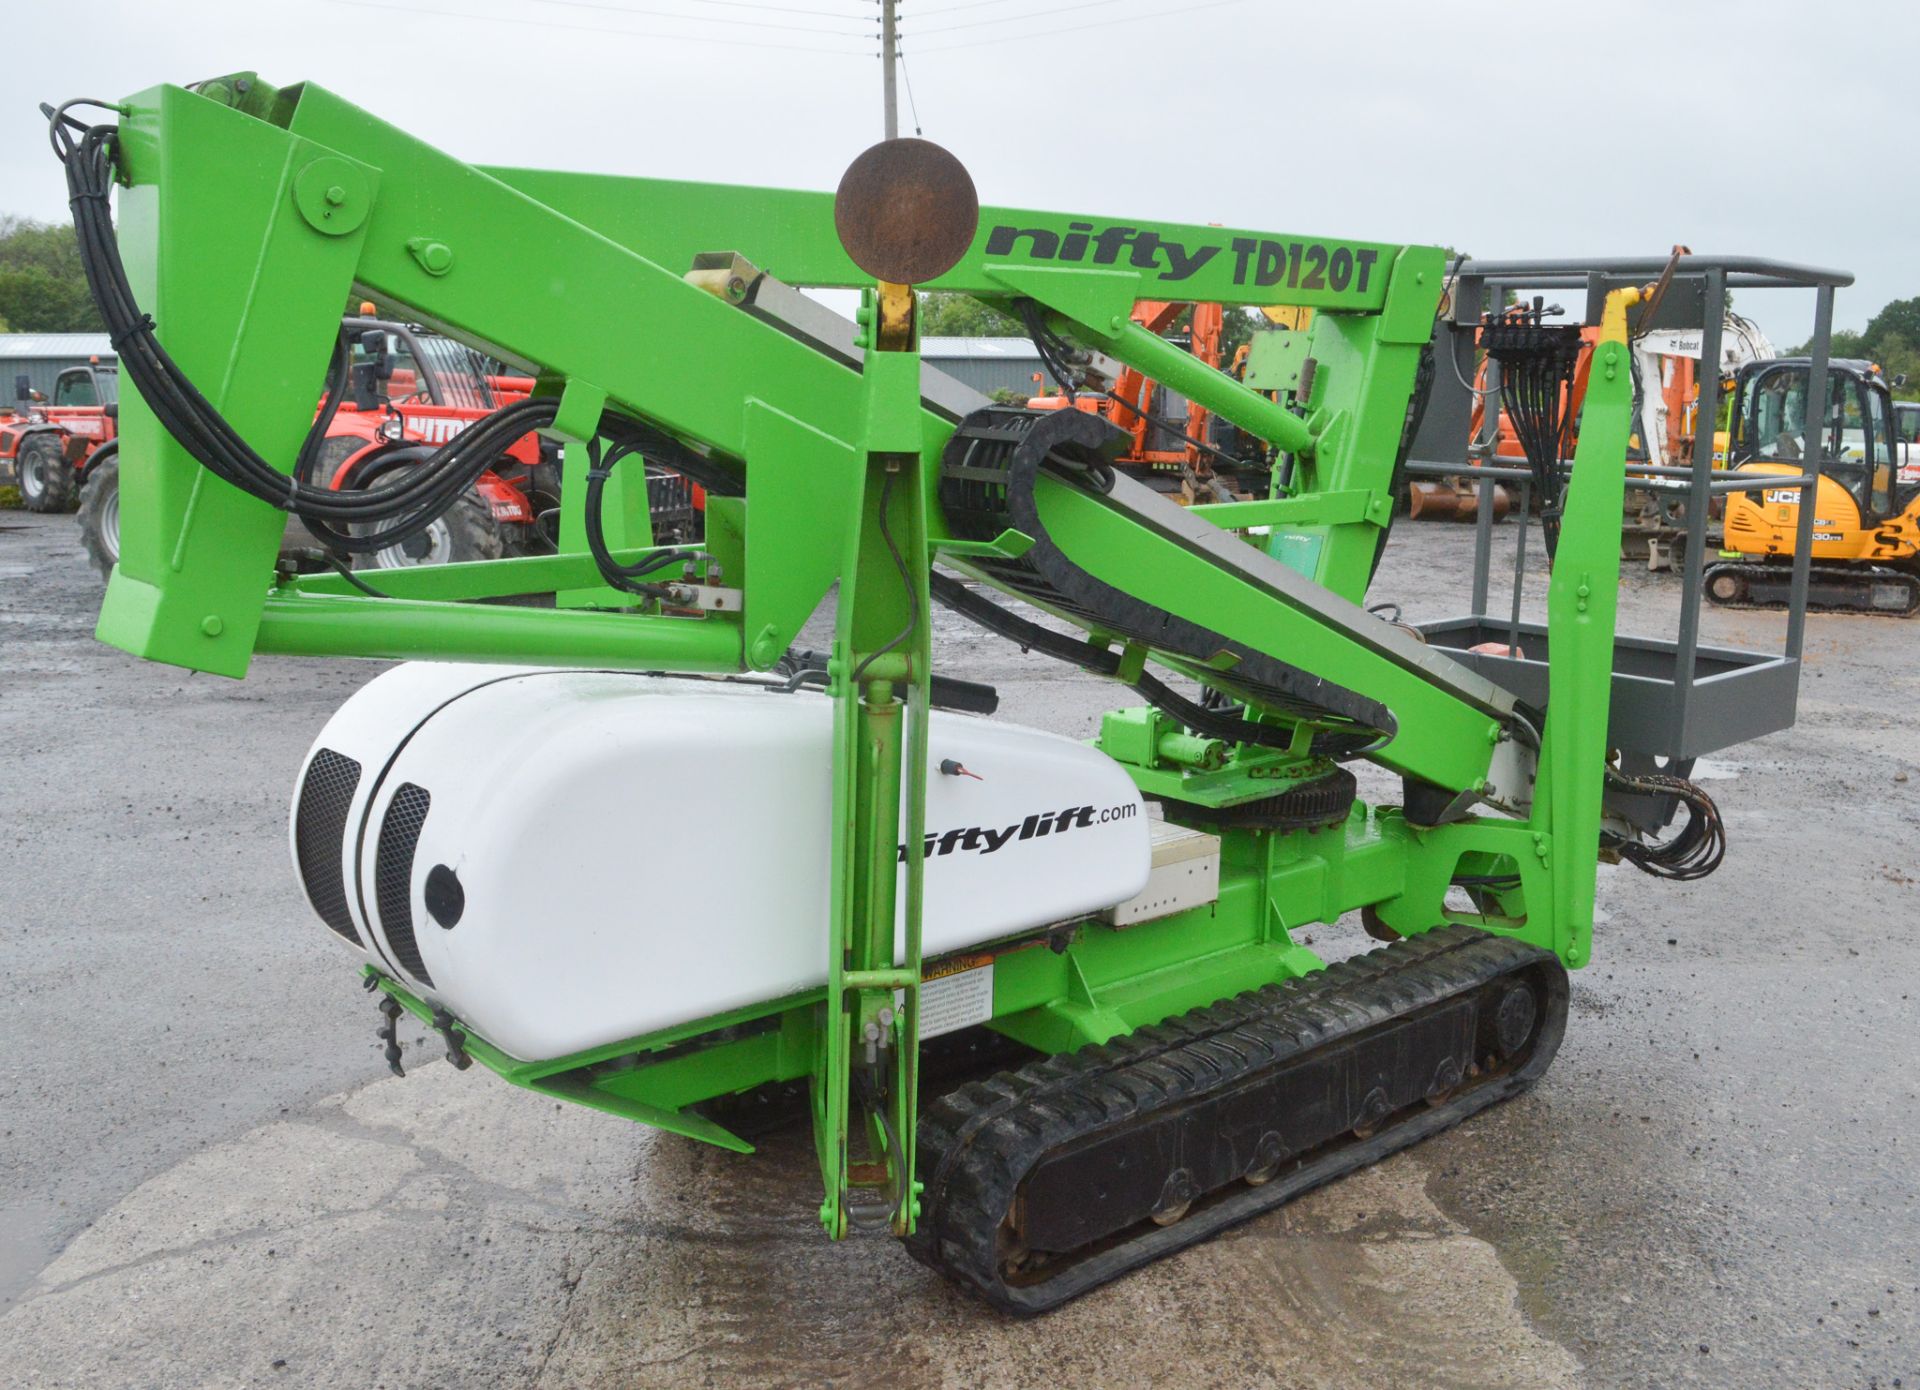 Nifty TD120T diesel driven rubber tracked boom lift - Image 4 of 11